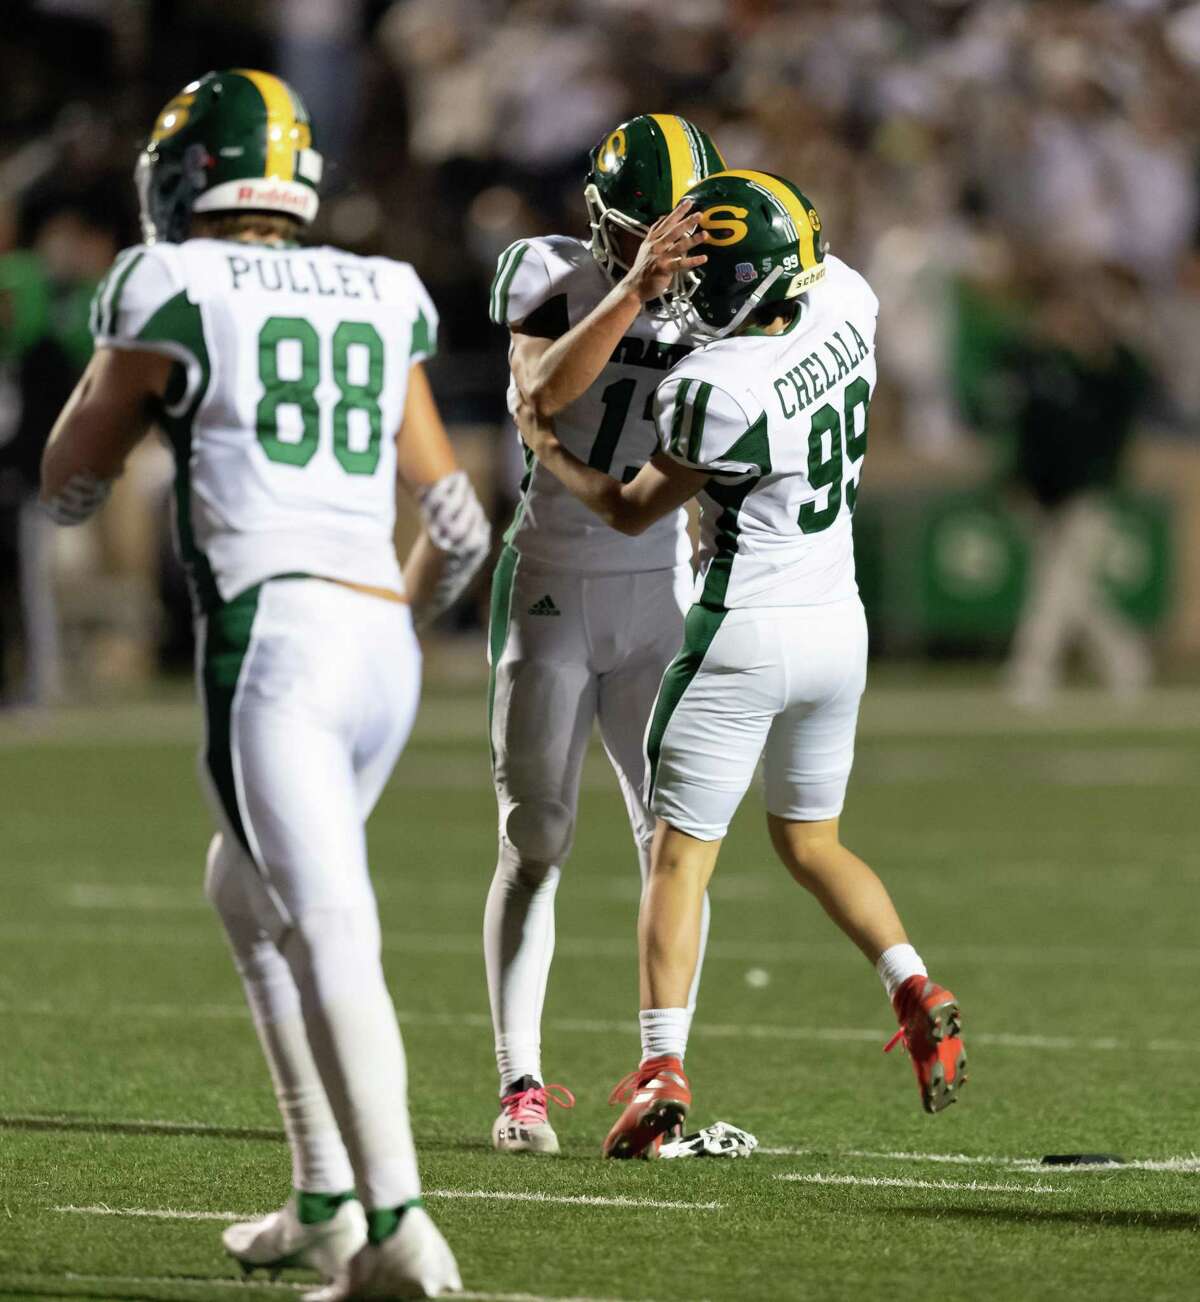 Giancarlo Chelala (99) of the Stratford Spartans celebrates with William Kight (13) after his field goal tied the score at 3-3 with Memorial Mustangs during a High School football game on Friday, October 30, 2020 at Tully Stadium in Houston Texas.